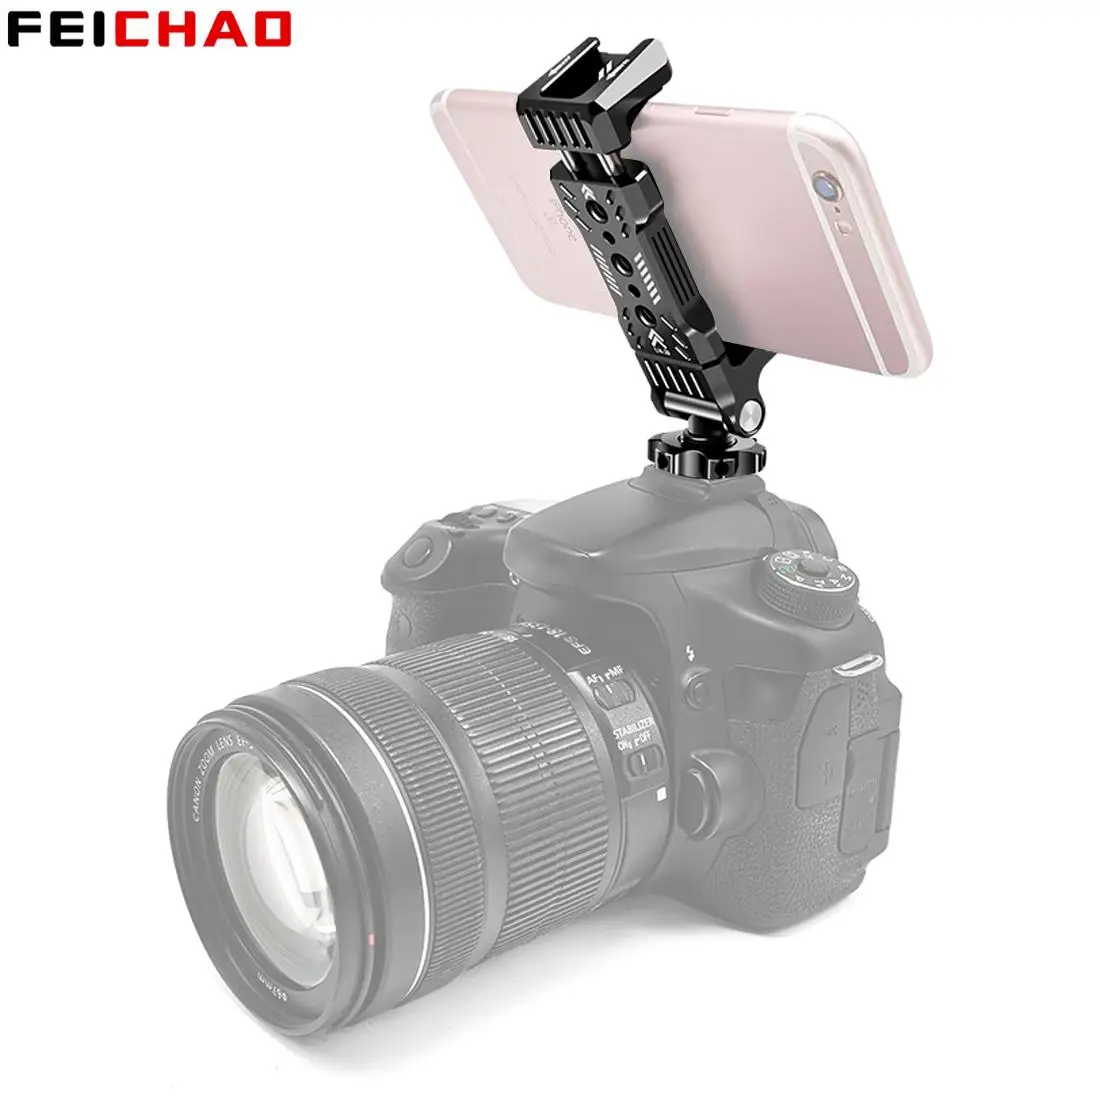 

Aluminum Alloy Vlog Shooting Phone Mount Holder DSLR Camera Microphone Tripod Mount Clamp with Cold Shoe Mount for Smartphone